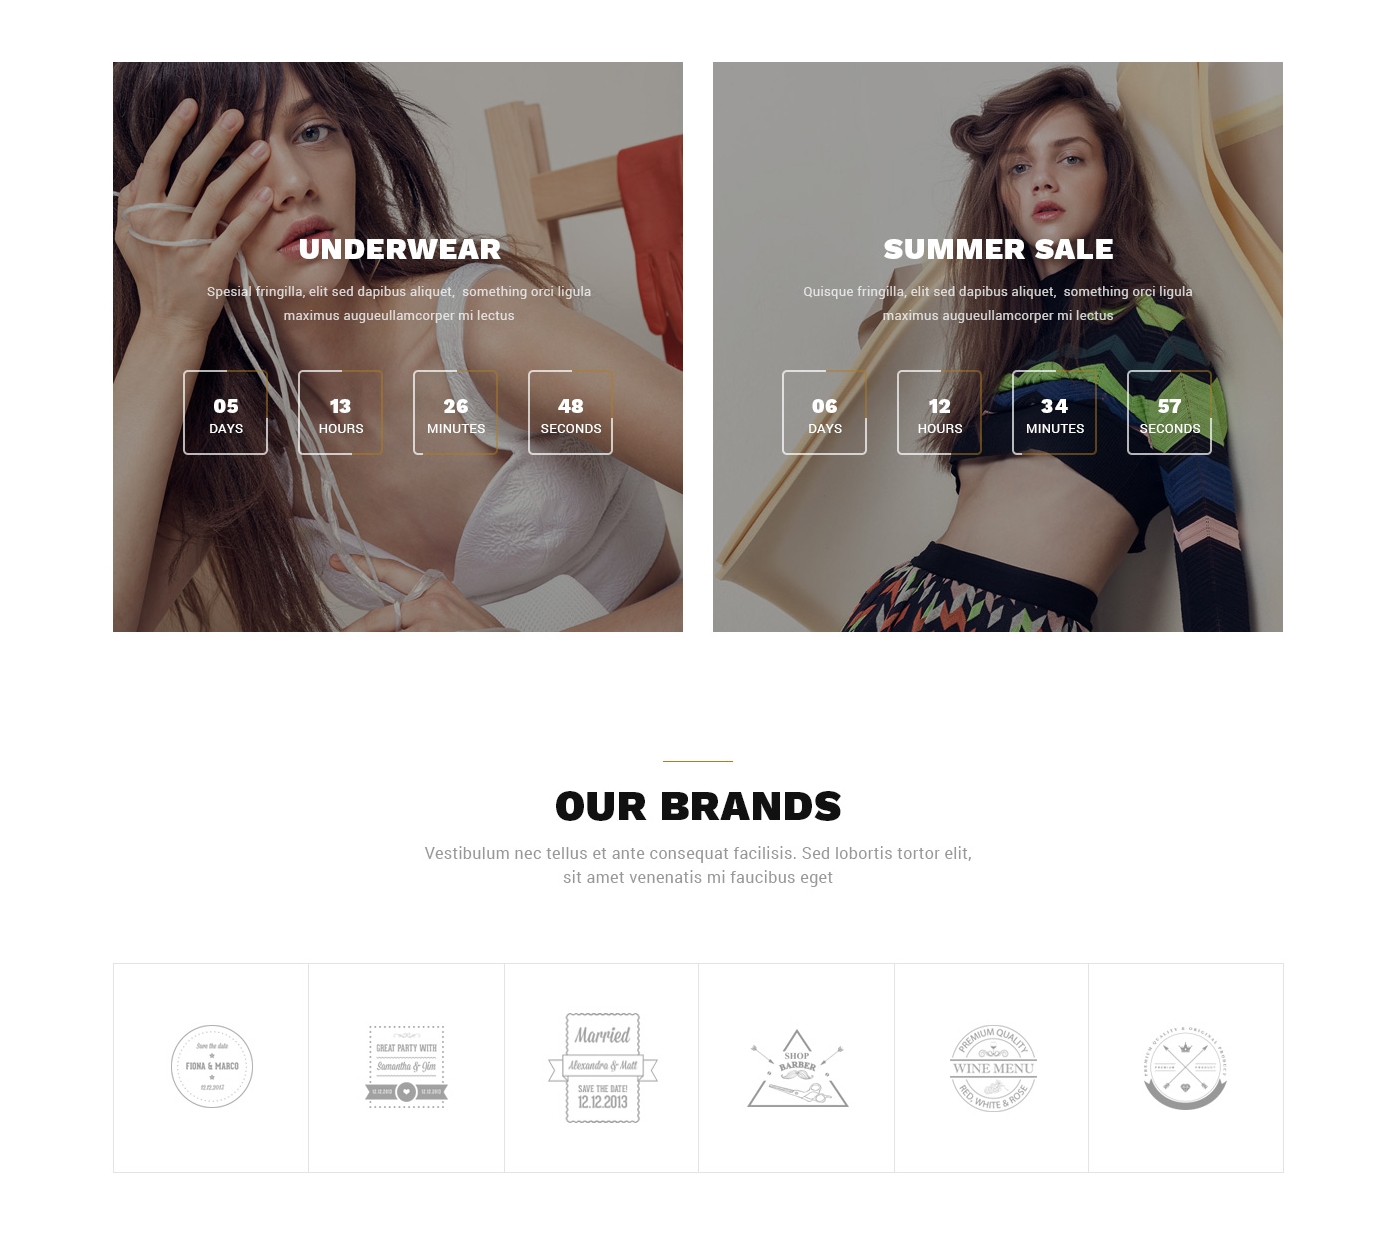 Mobile Bootstrap Image Gallery Theme